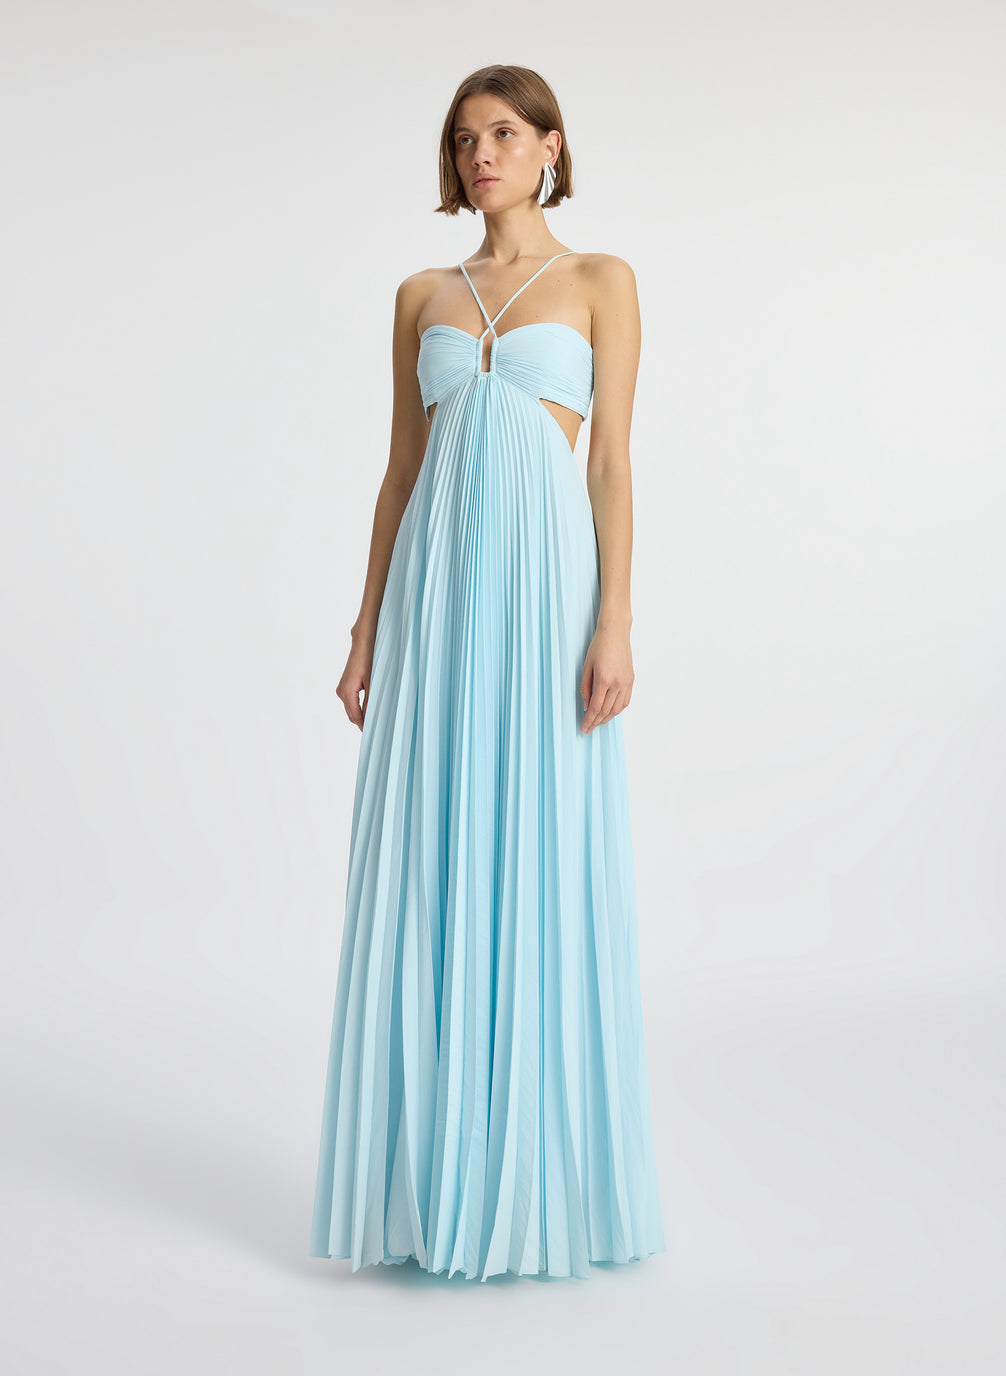 side  view of woman wearing aqua satin pleated gown